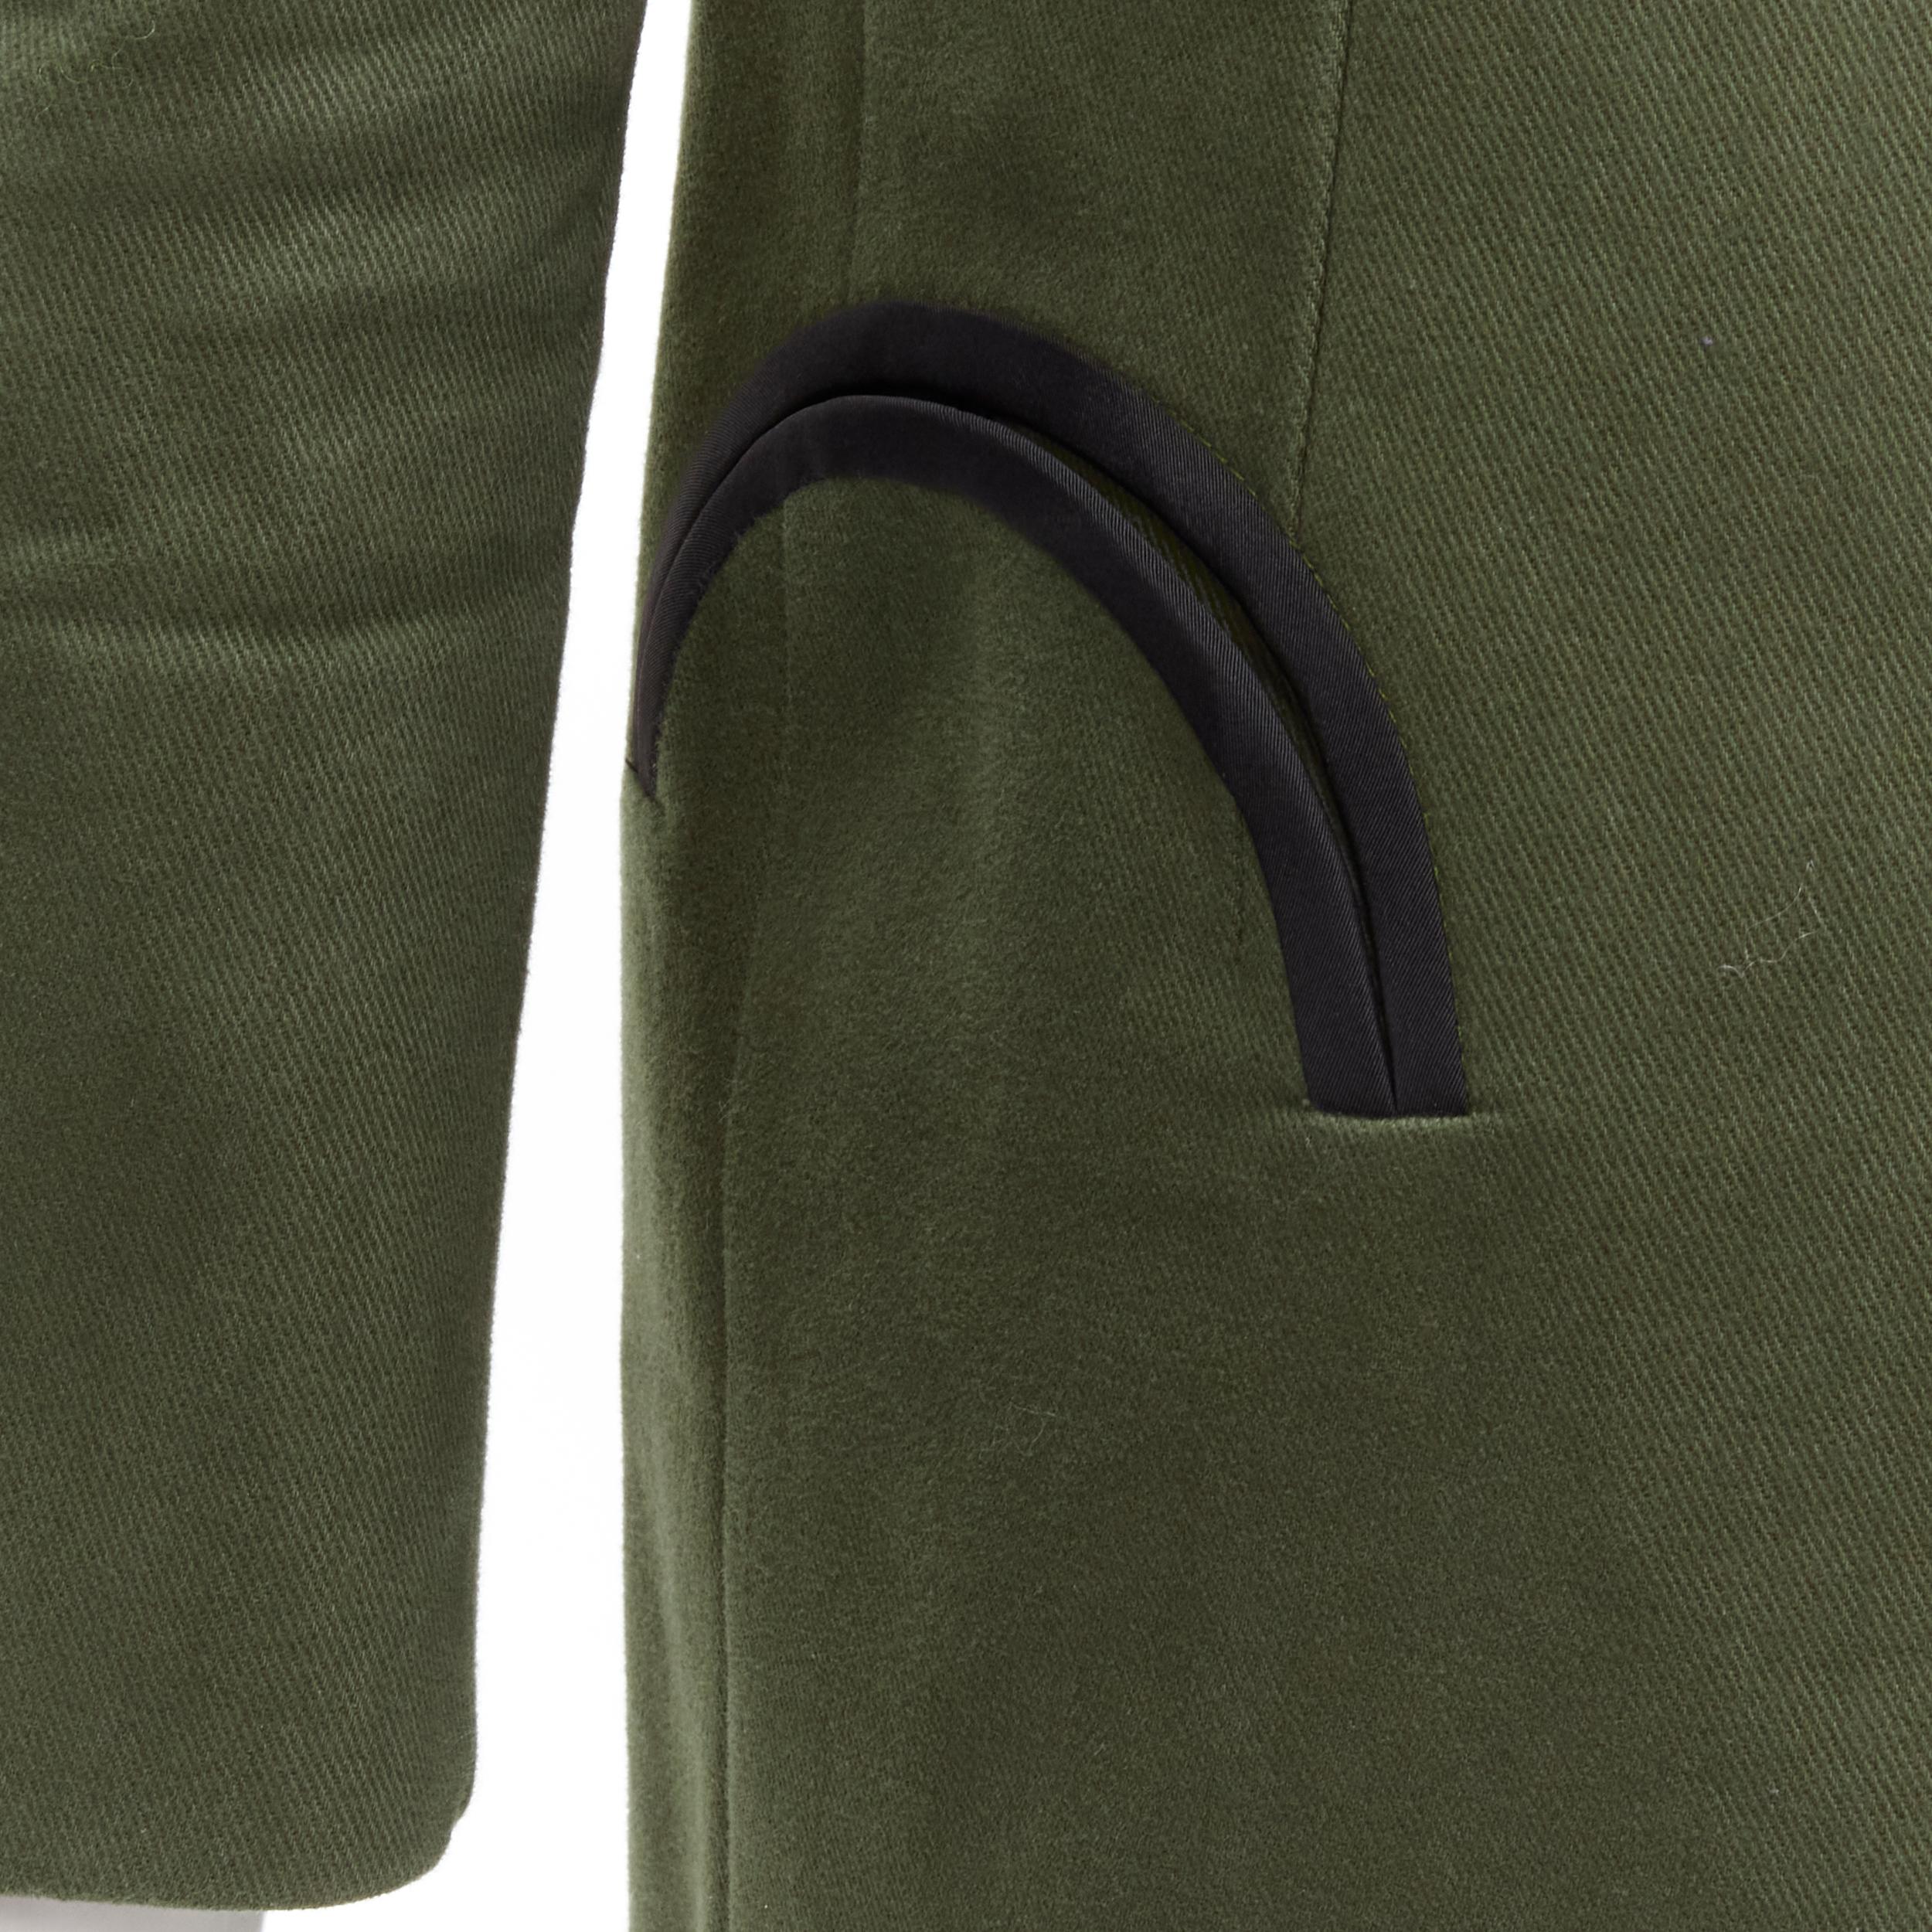 BLAZE MILANO Midnight Smoking khaki green cotton curved pocket shawl blazer S 
Reference: KEDG/A00146 
Brand: Blaze Milano 
Material: Feels like cotton 
Color: Green 
Pattern: Solid 
Extra Detail: Limited Edition and Made for Lane Crawford. Midnight